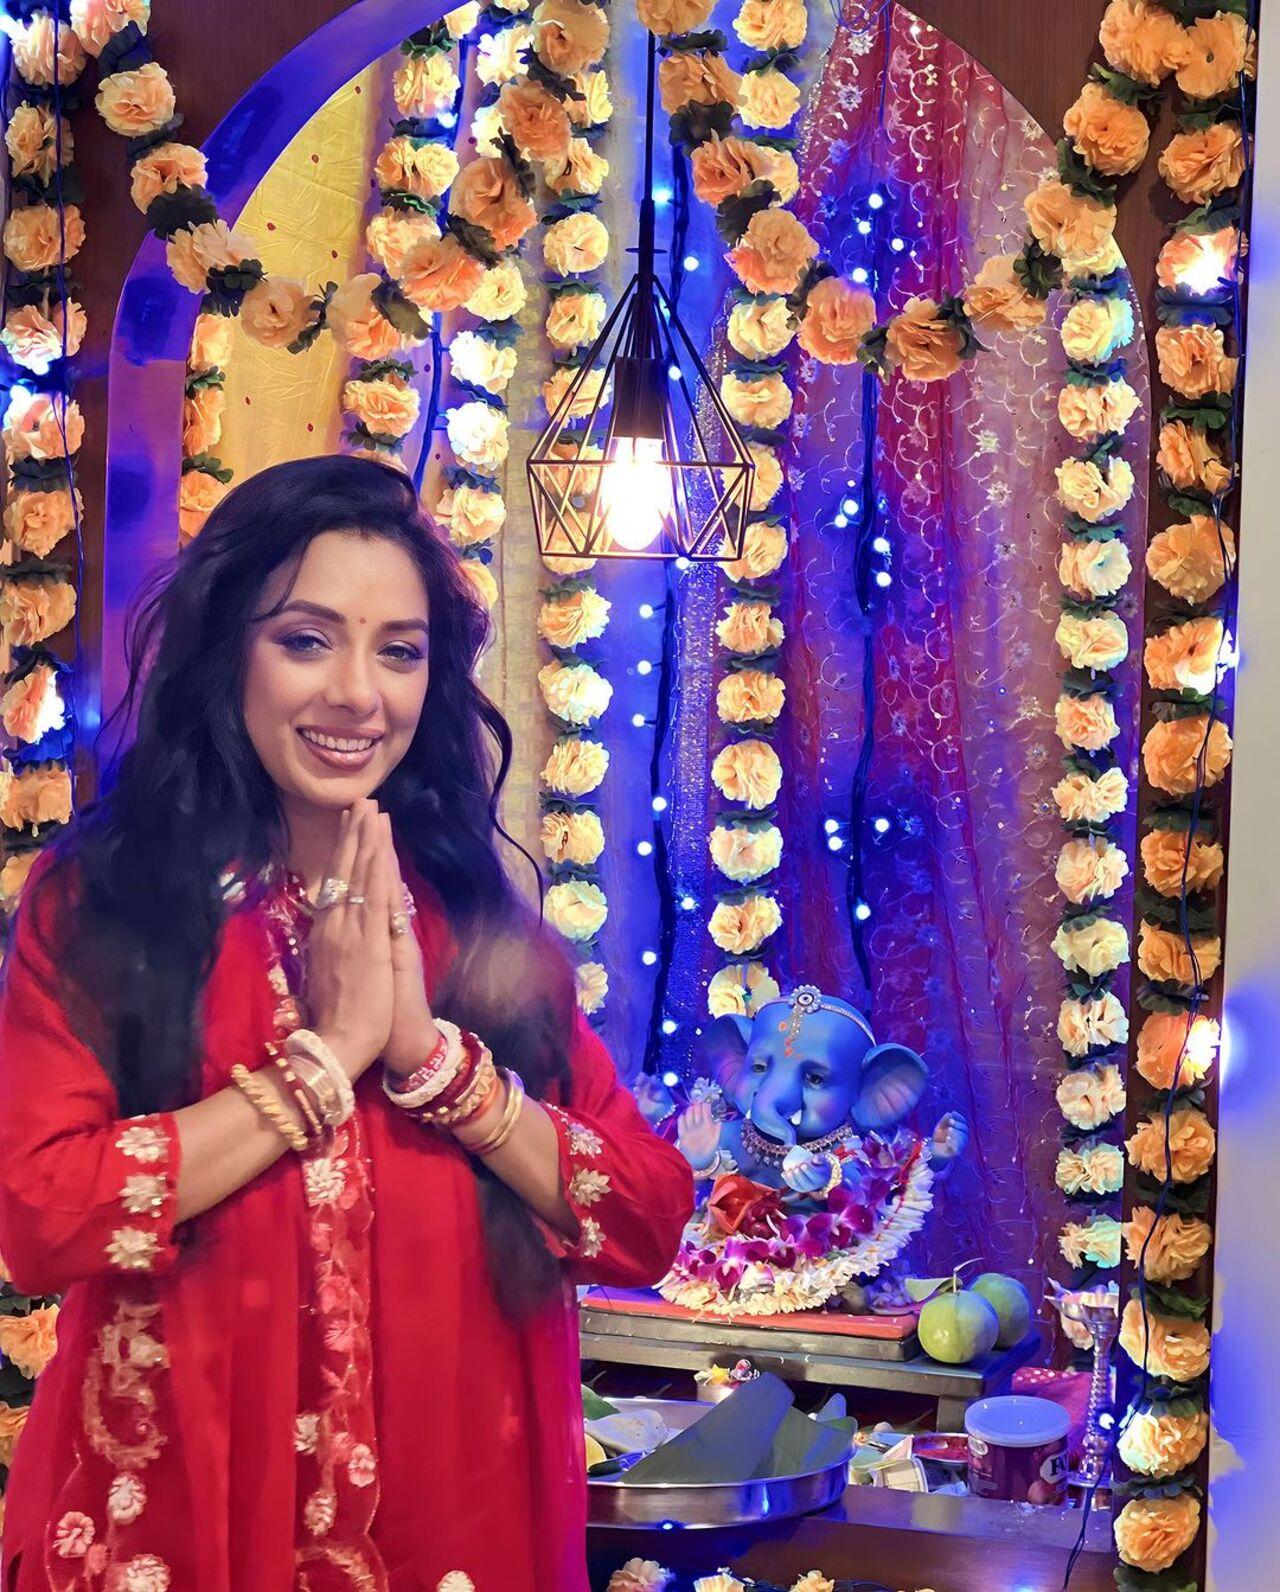 Rupali Ganguly invited Ganpati Bappa home and sought his blessings. The actress shared multiple pictures from the first day of the festival on Instagram